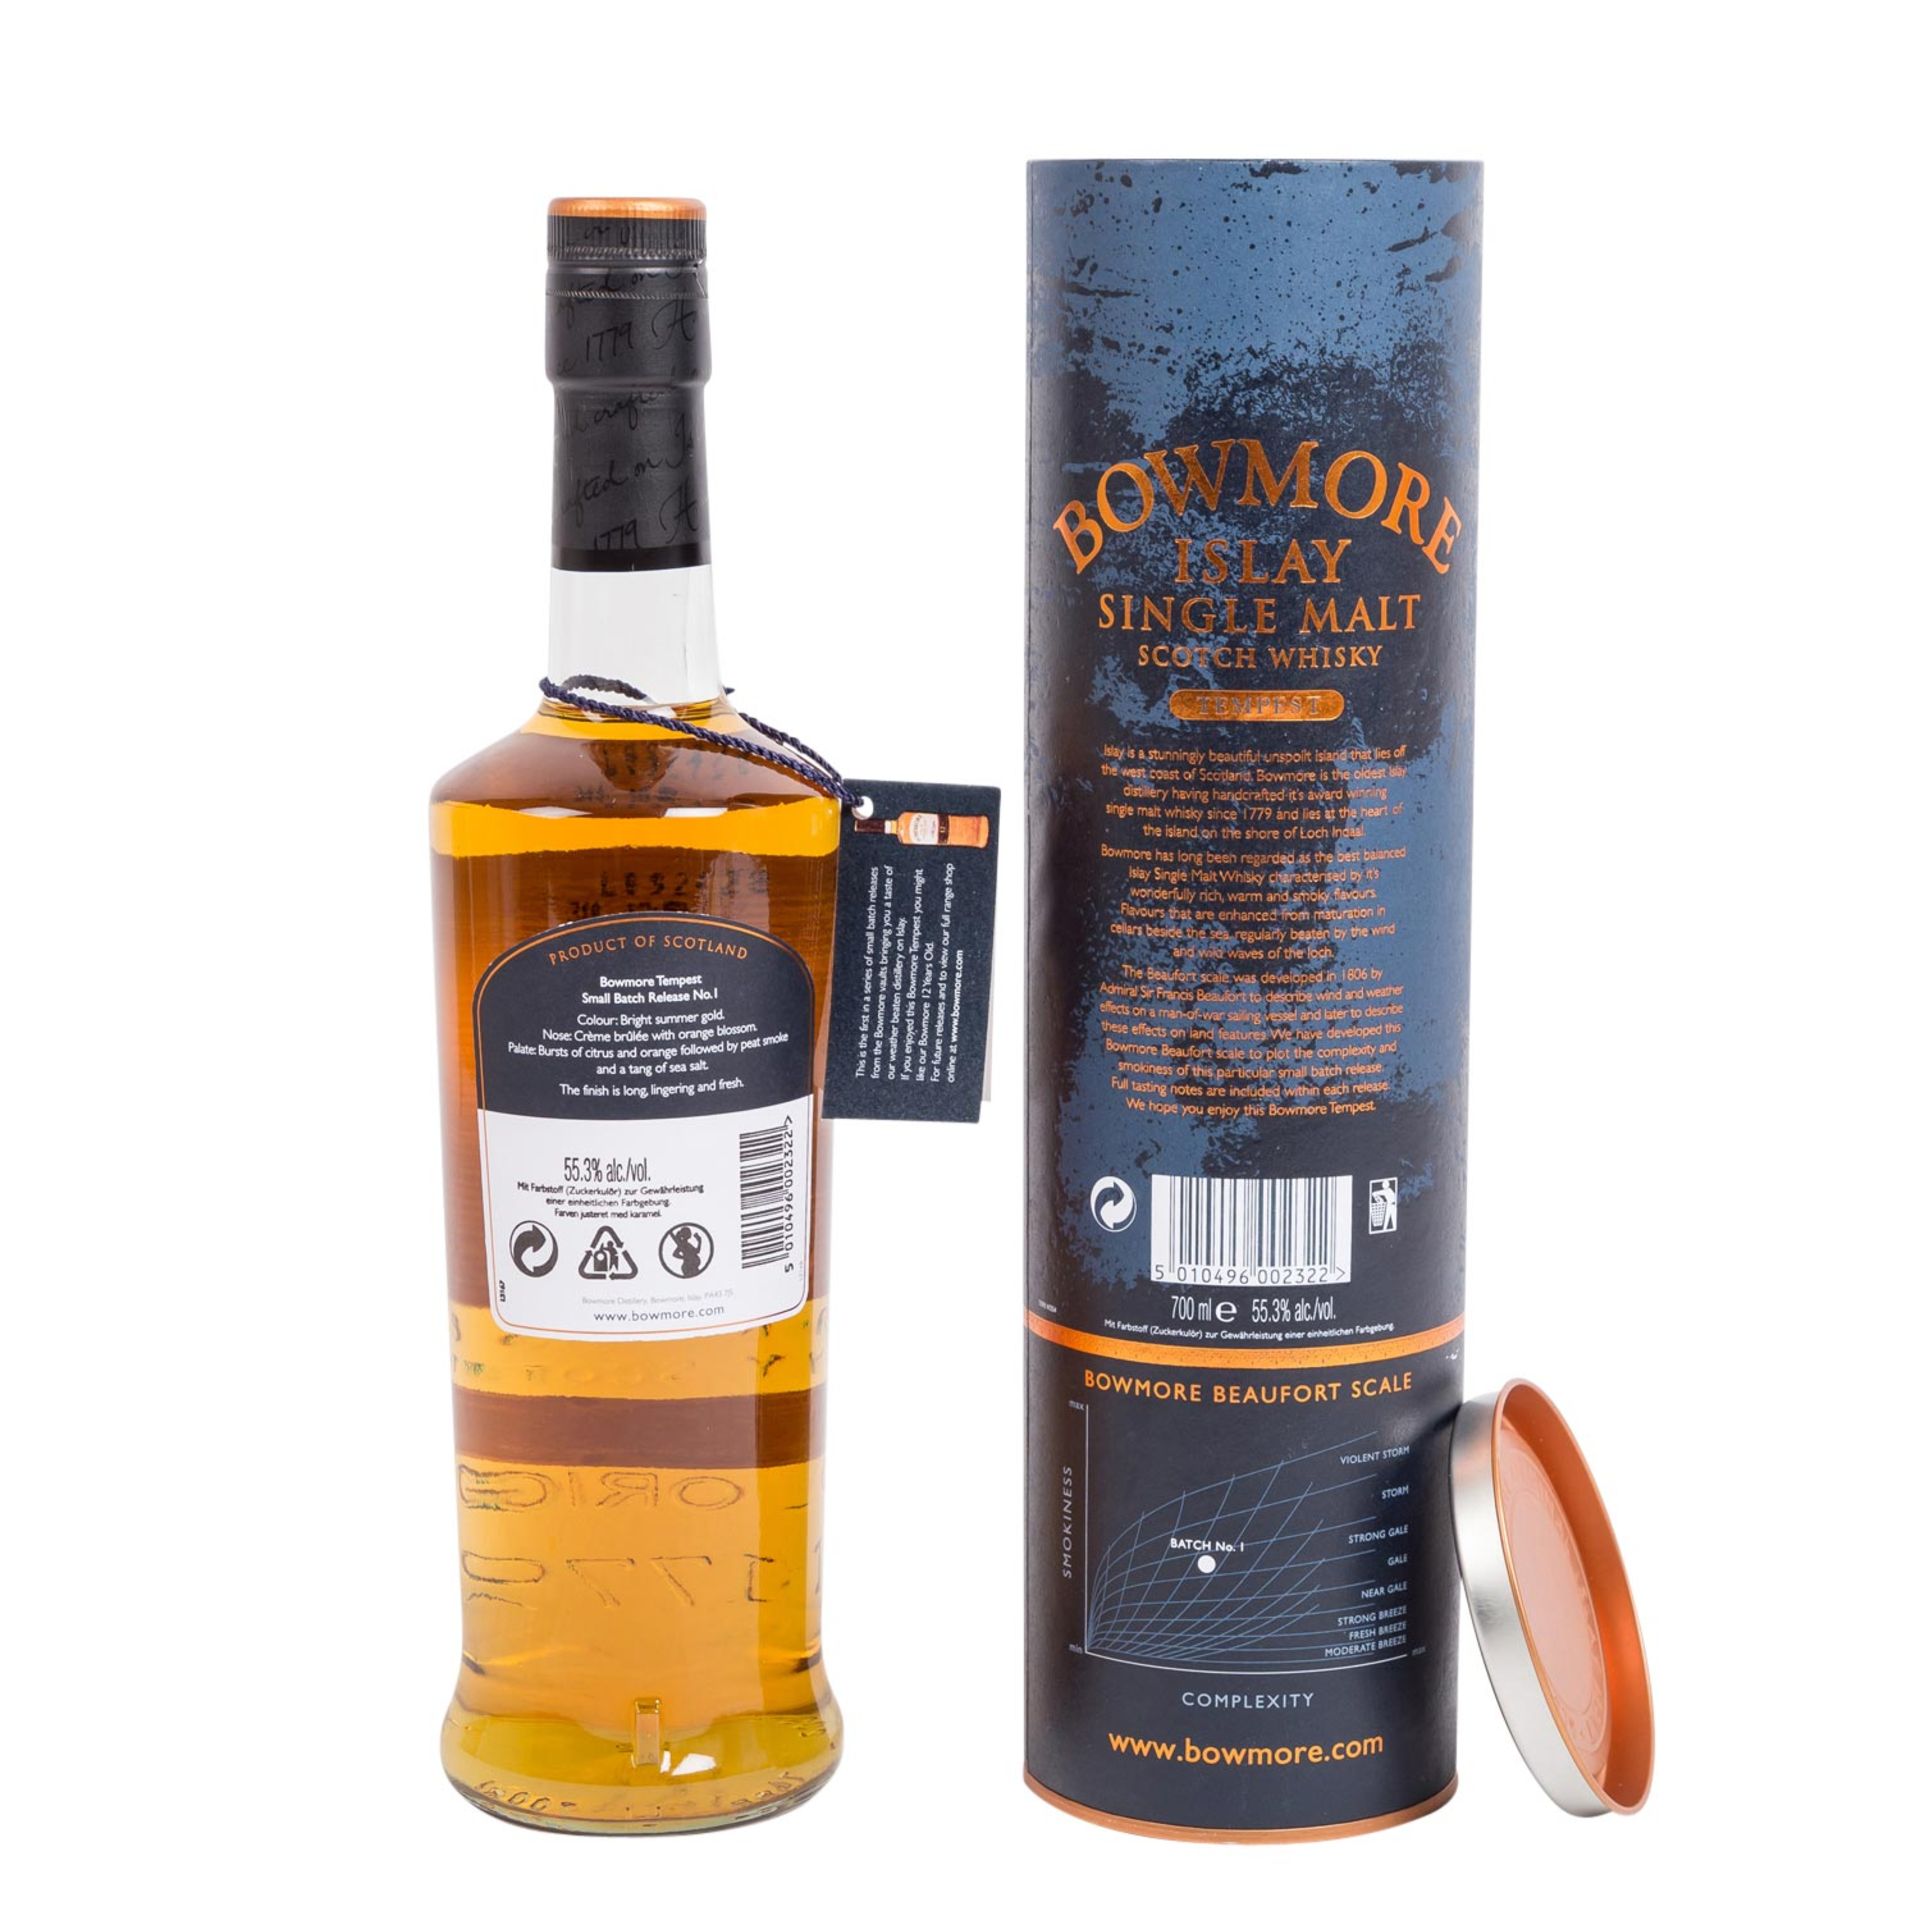 BOWMORE Single Malt Scotch Whisky 'TEMPEST - small batch release', 10 years - Image 2 of 3